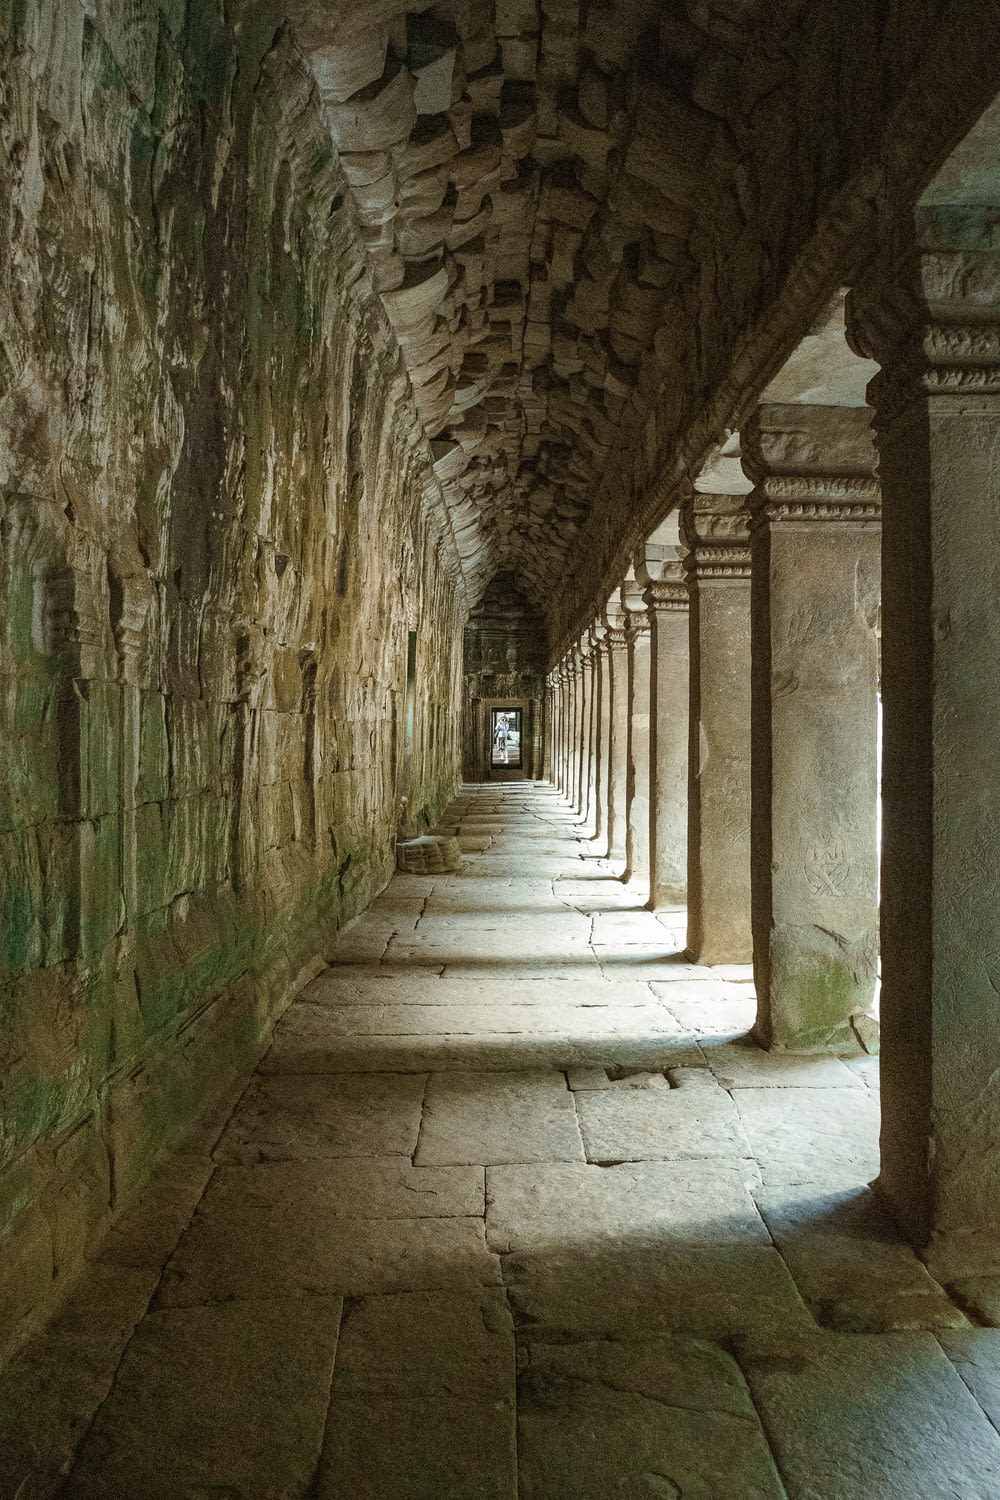 a long hallway with stone walls and pillars